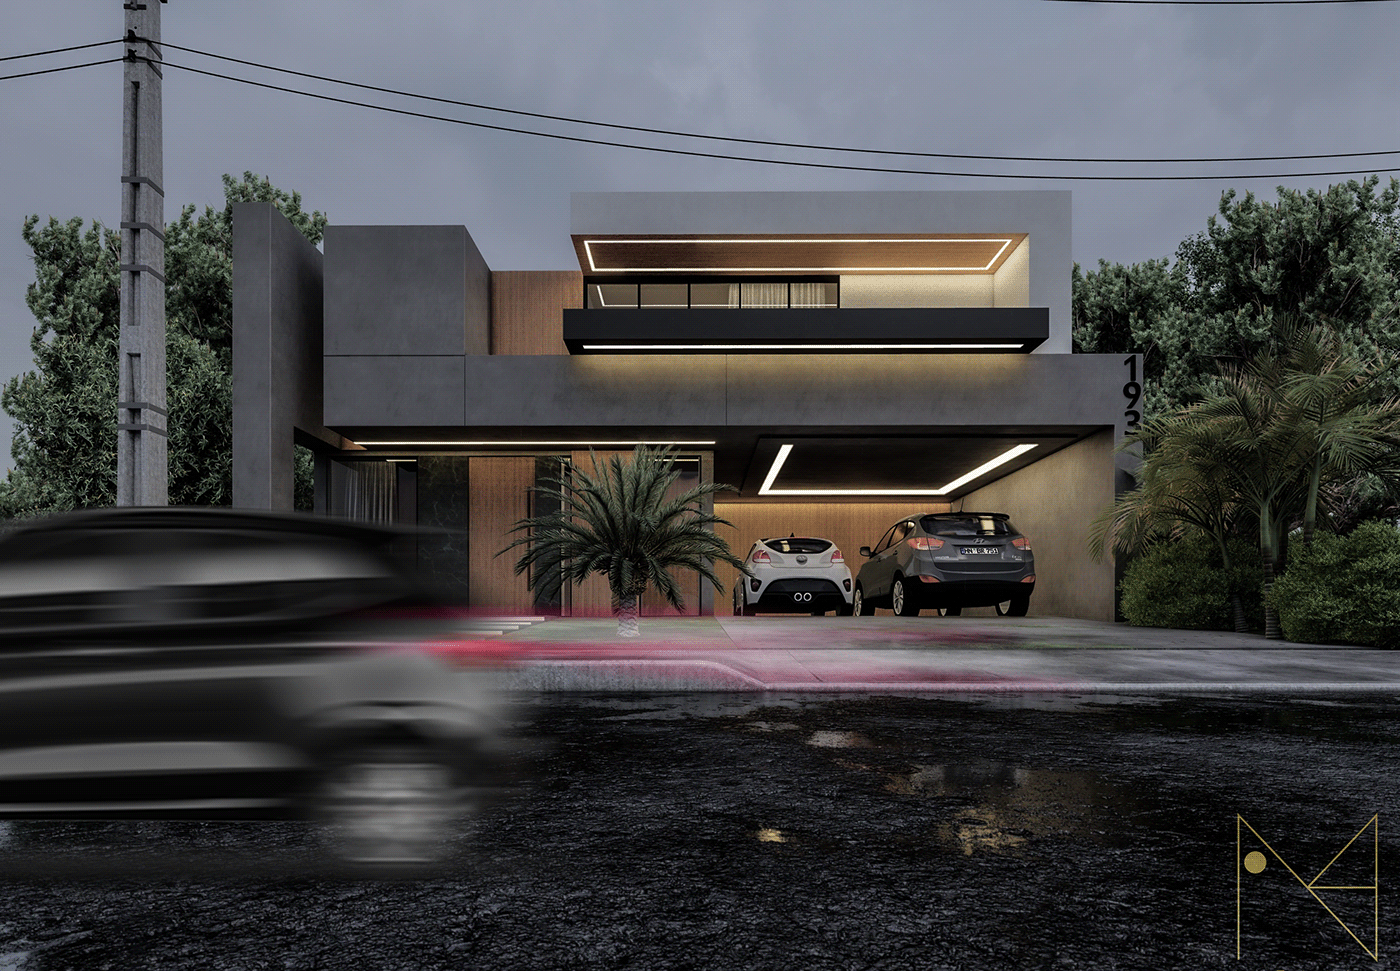 3D Arcchitecture architecture desinger exterior fachada house housedesign modern Residence